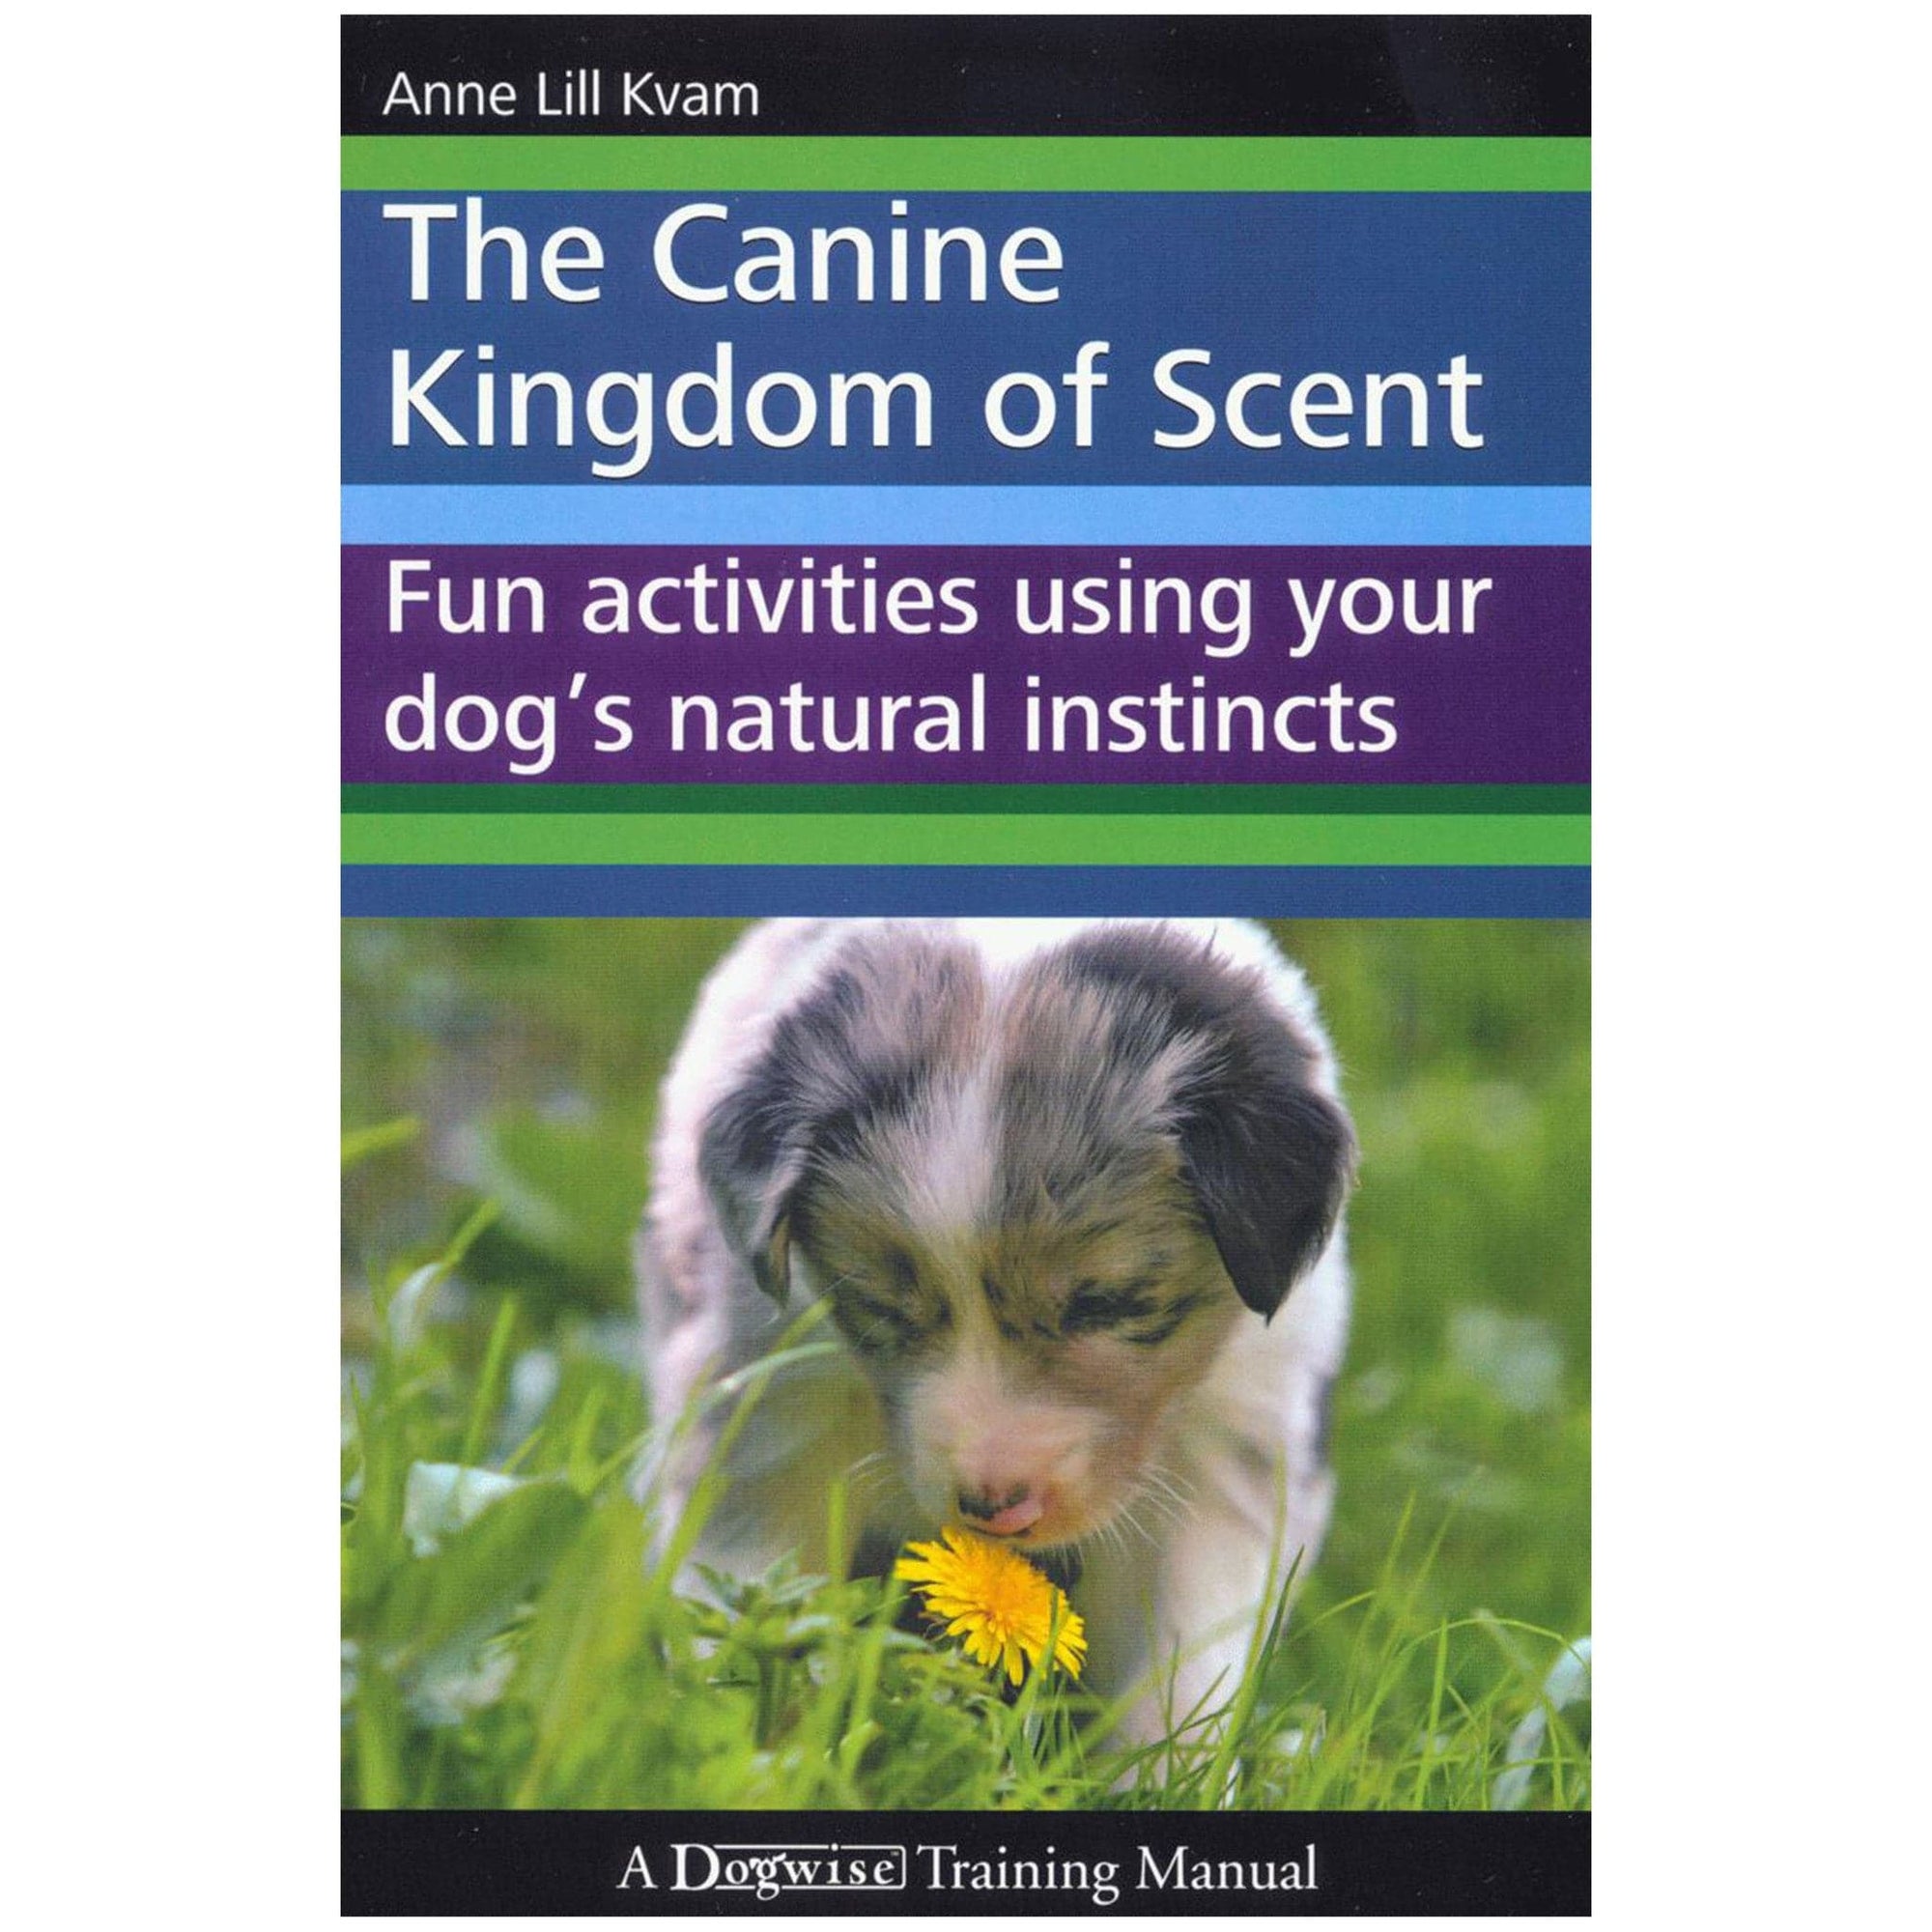 The Canine Kingdom of Scent: Fun Activities Using Your Dog’s Natural Instincts   e-book